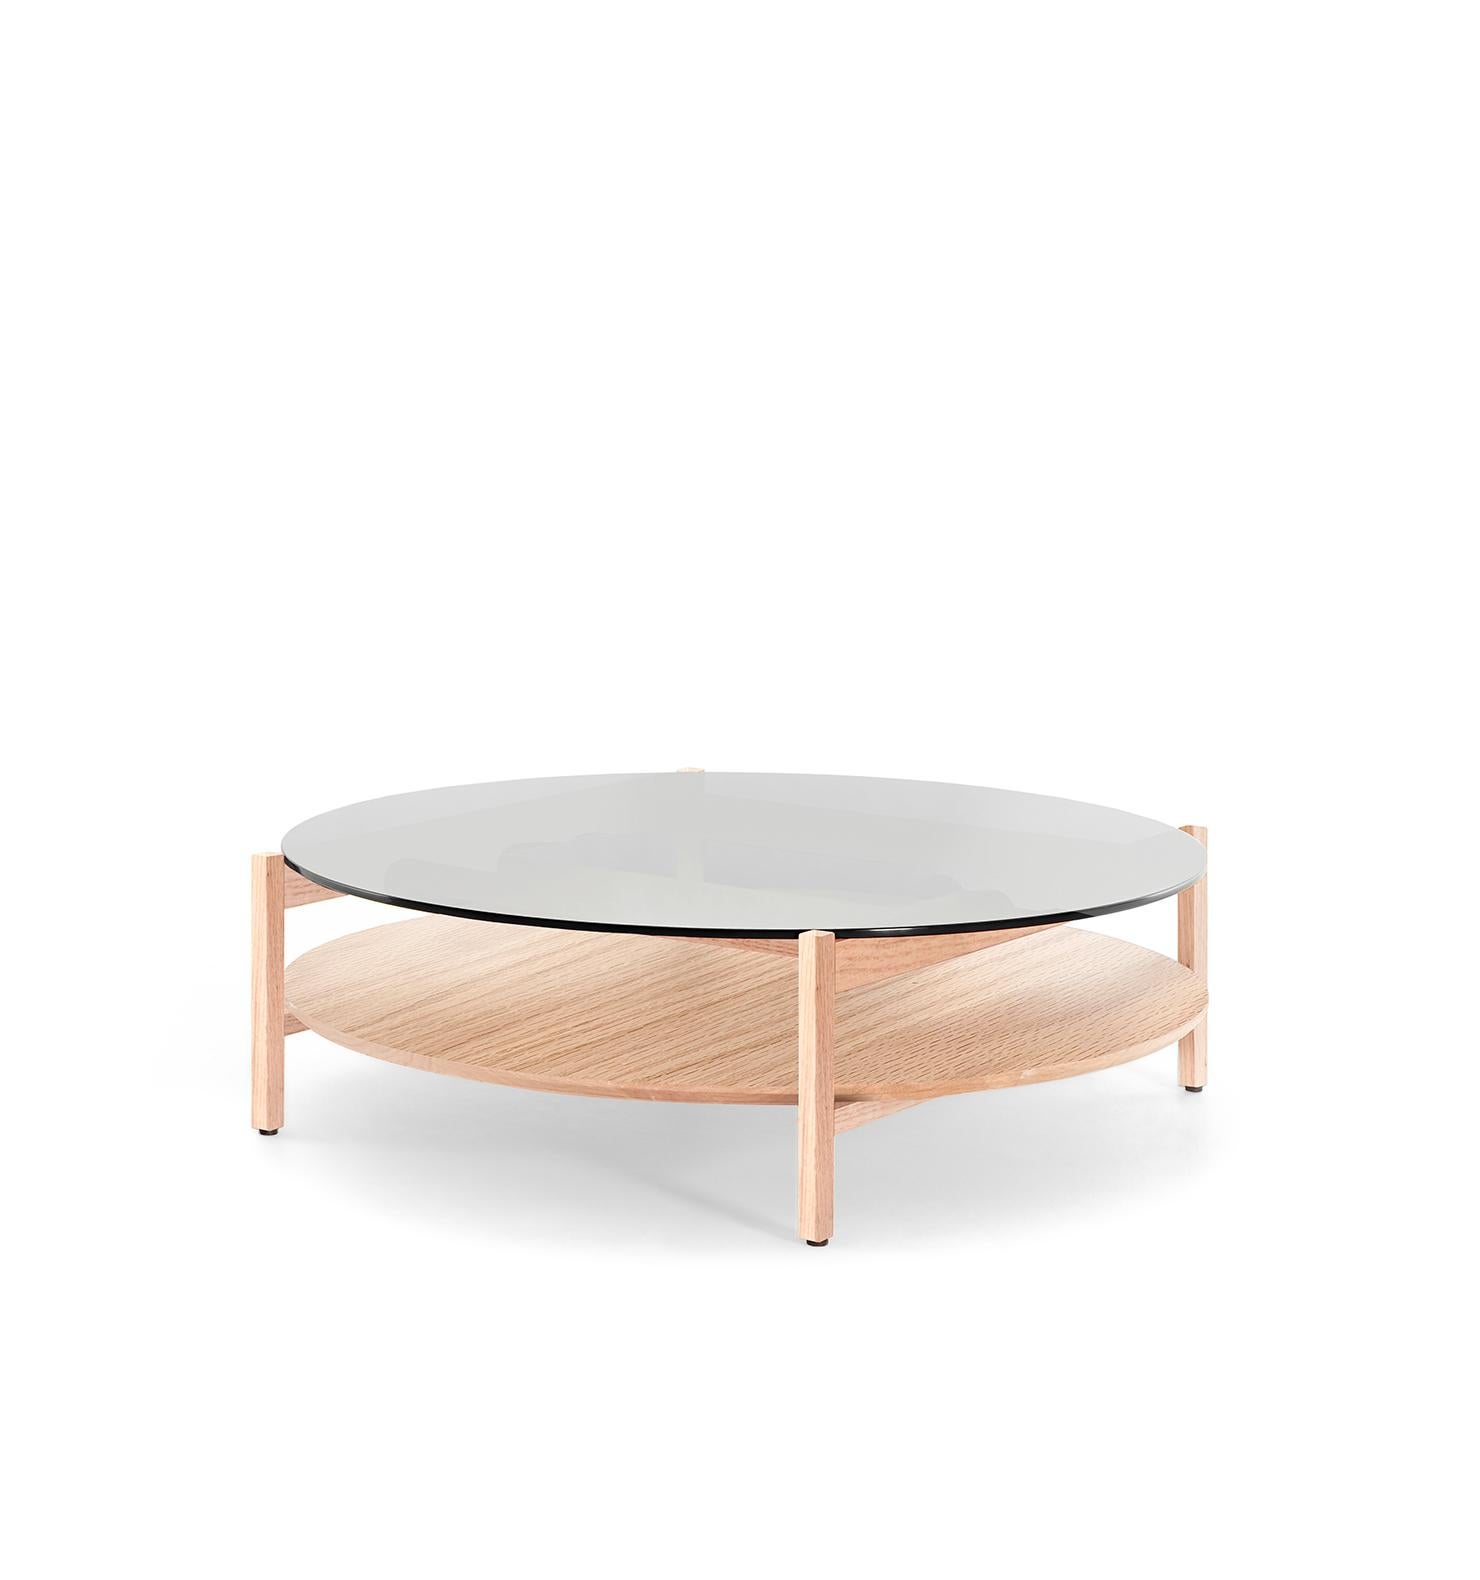 
Introducing the Mesa de Centro DEDO, a Mexican Contemporary Coffee Table designed by Emiliano Molina for CUCHARA. This exceptional piece features two surfaces made from different materials, resting on a sleek and slender frame. The Mesa de Centro